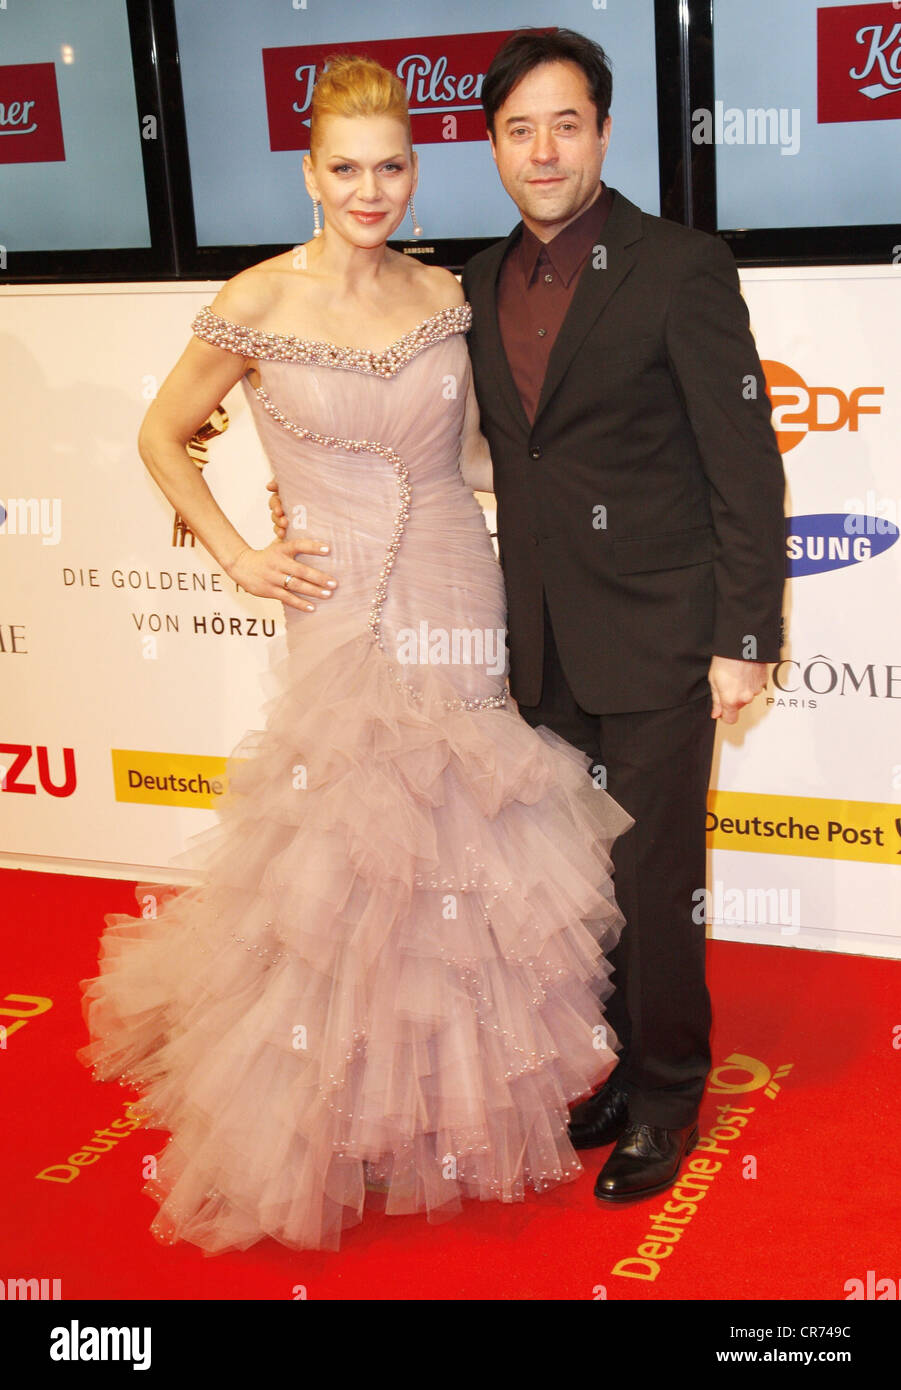 Liefers, Jan Josef, * 8.8.1964, German actor, full length, with his wife Anna Loos, 45th Goldene Kamera (Golden Camera), Axel Springer Haus, Berlin, Germany, 30.1.2010, Stock Photo